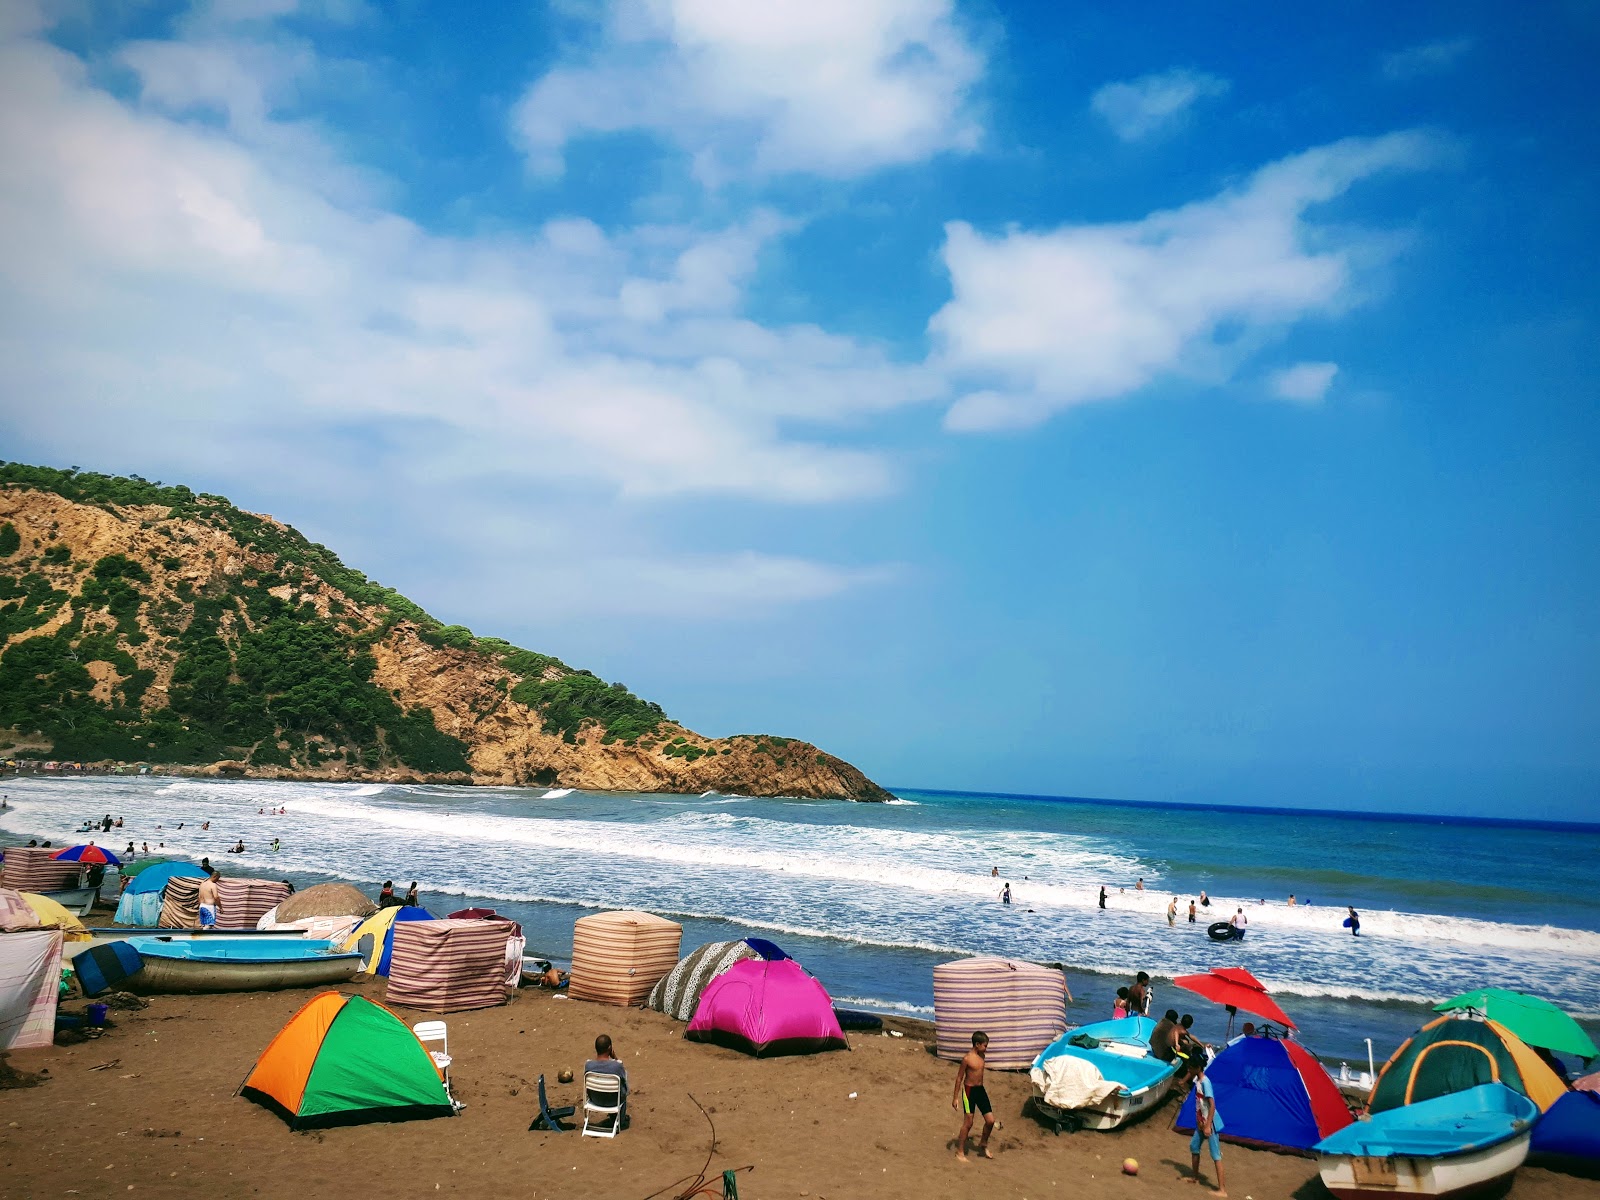 Photo of Plage Sidi Brahim - popular place among relax connoisseurs